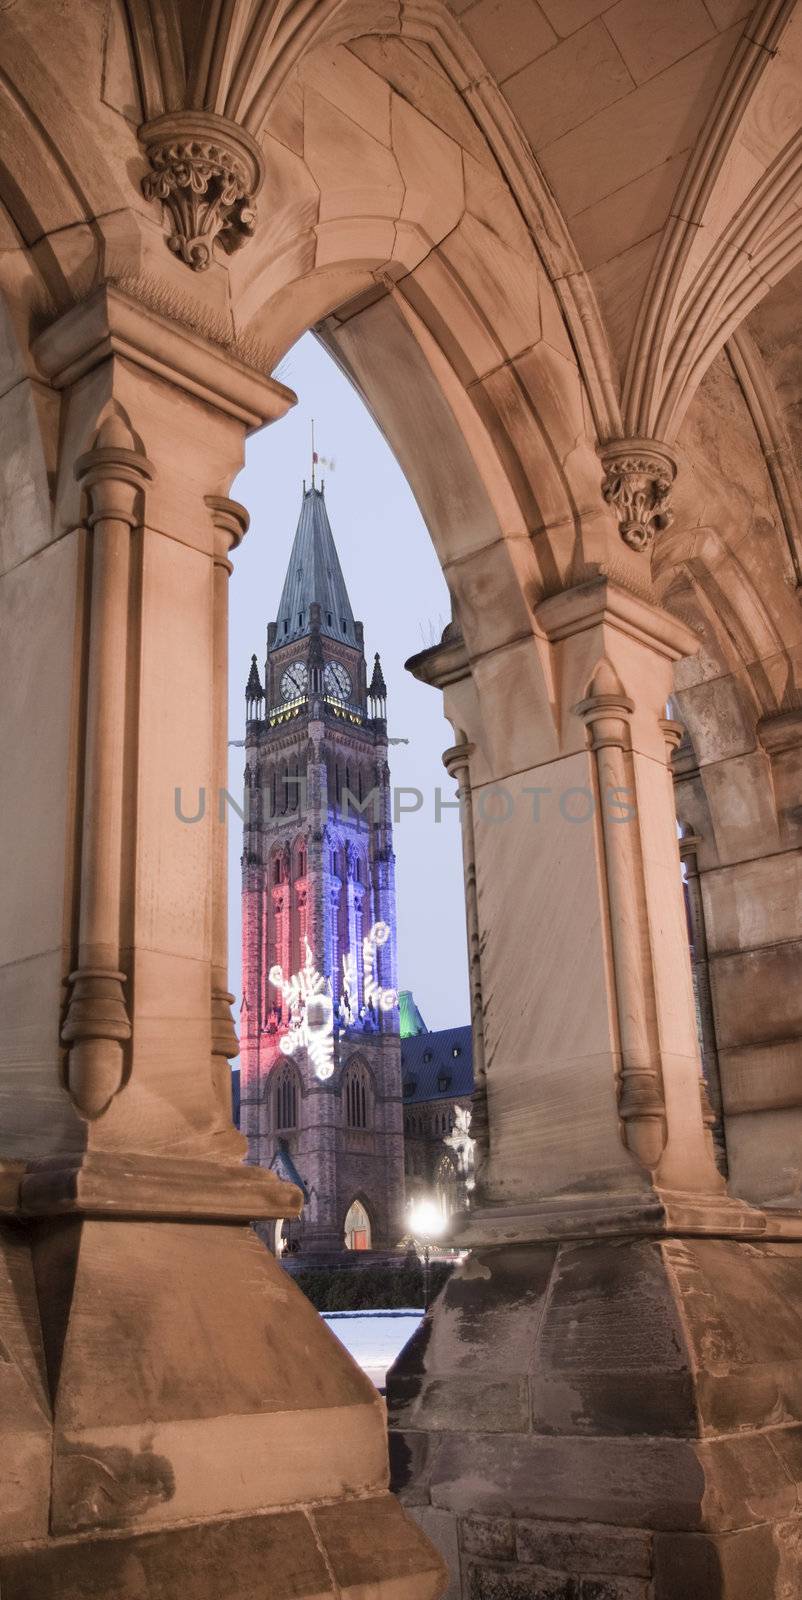 The canadian Parliament Centre Block seen through the arch of the East Block building during the Holiday Season.